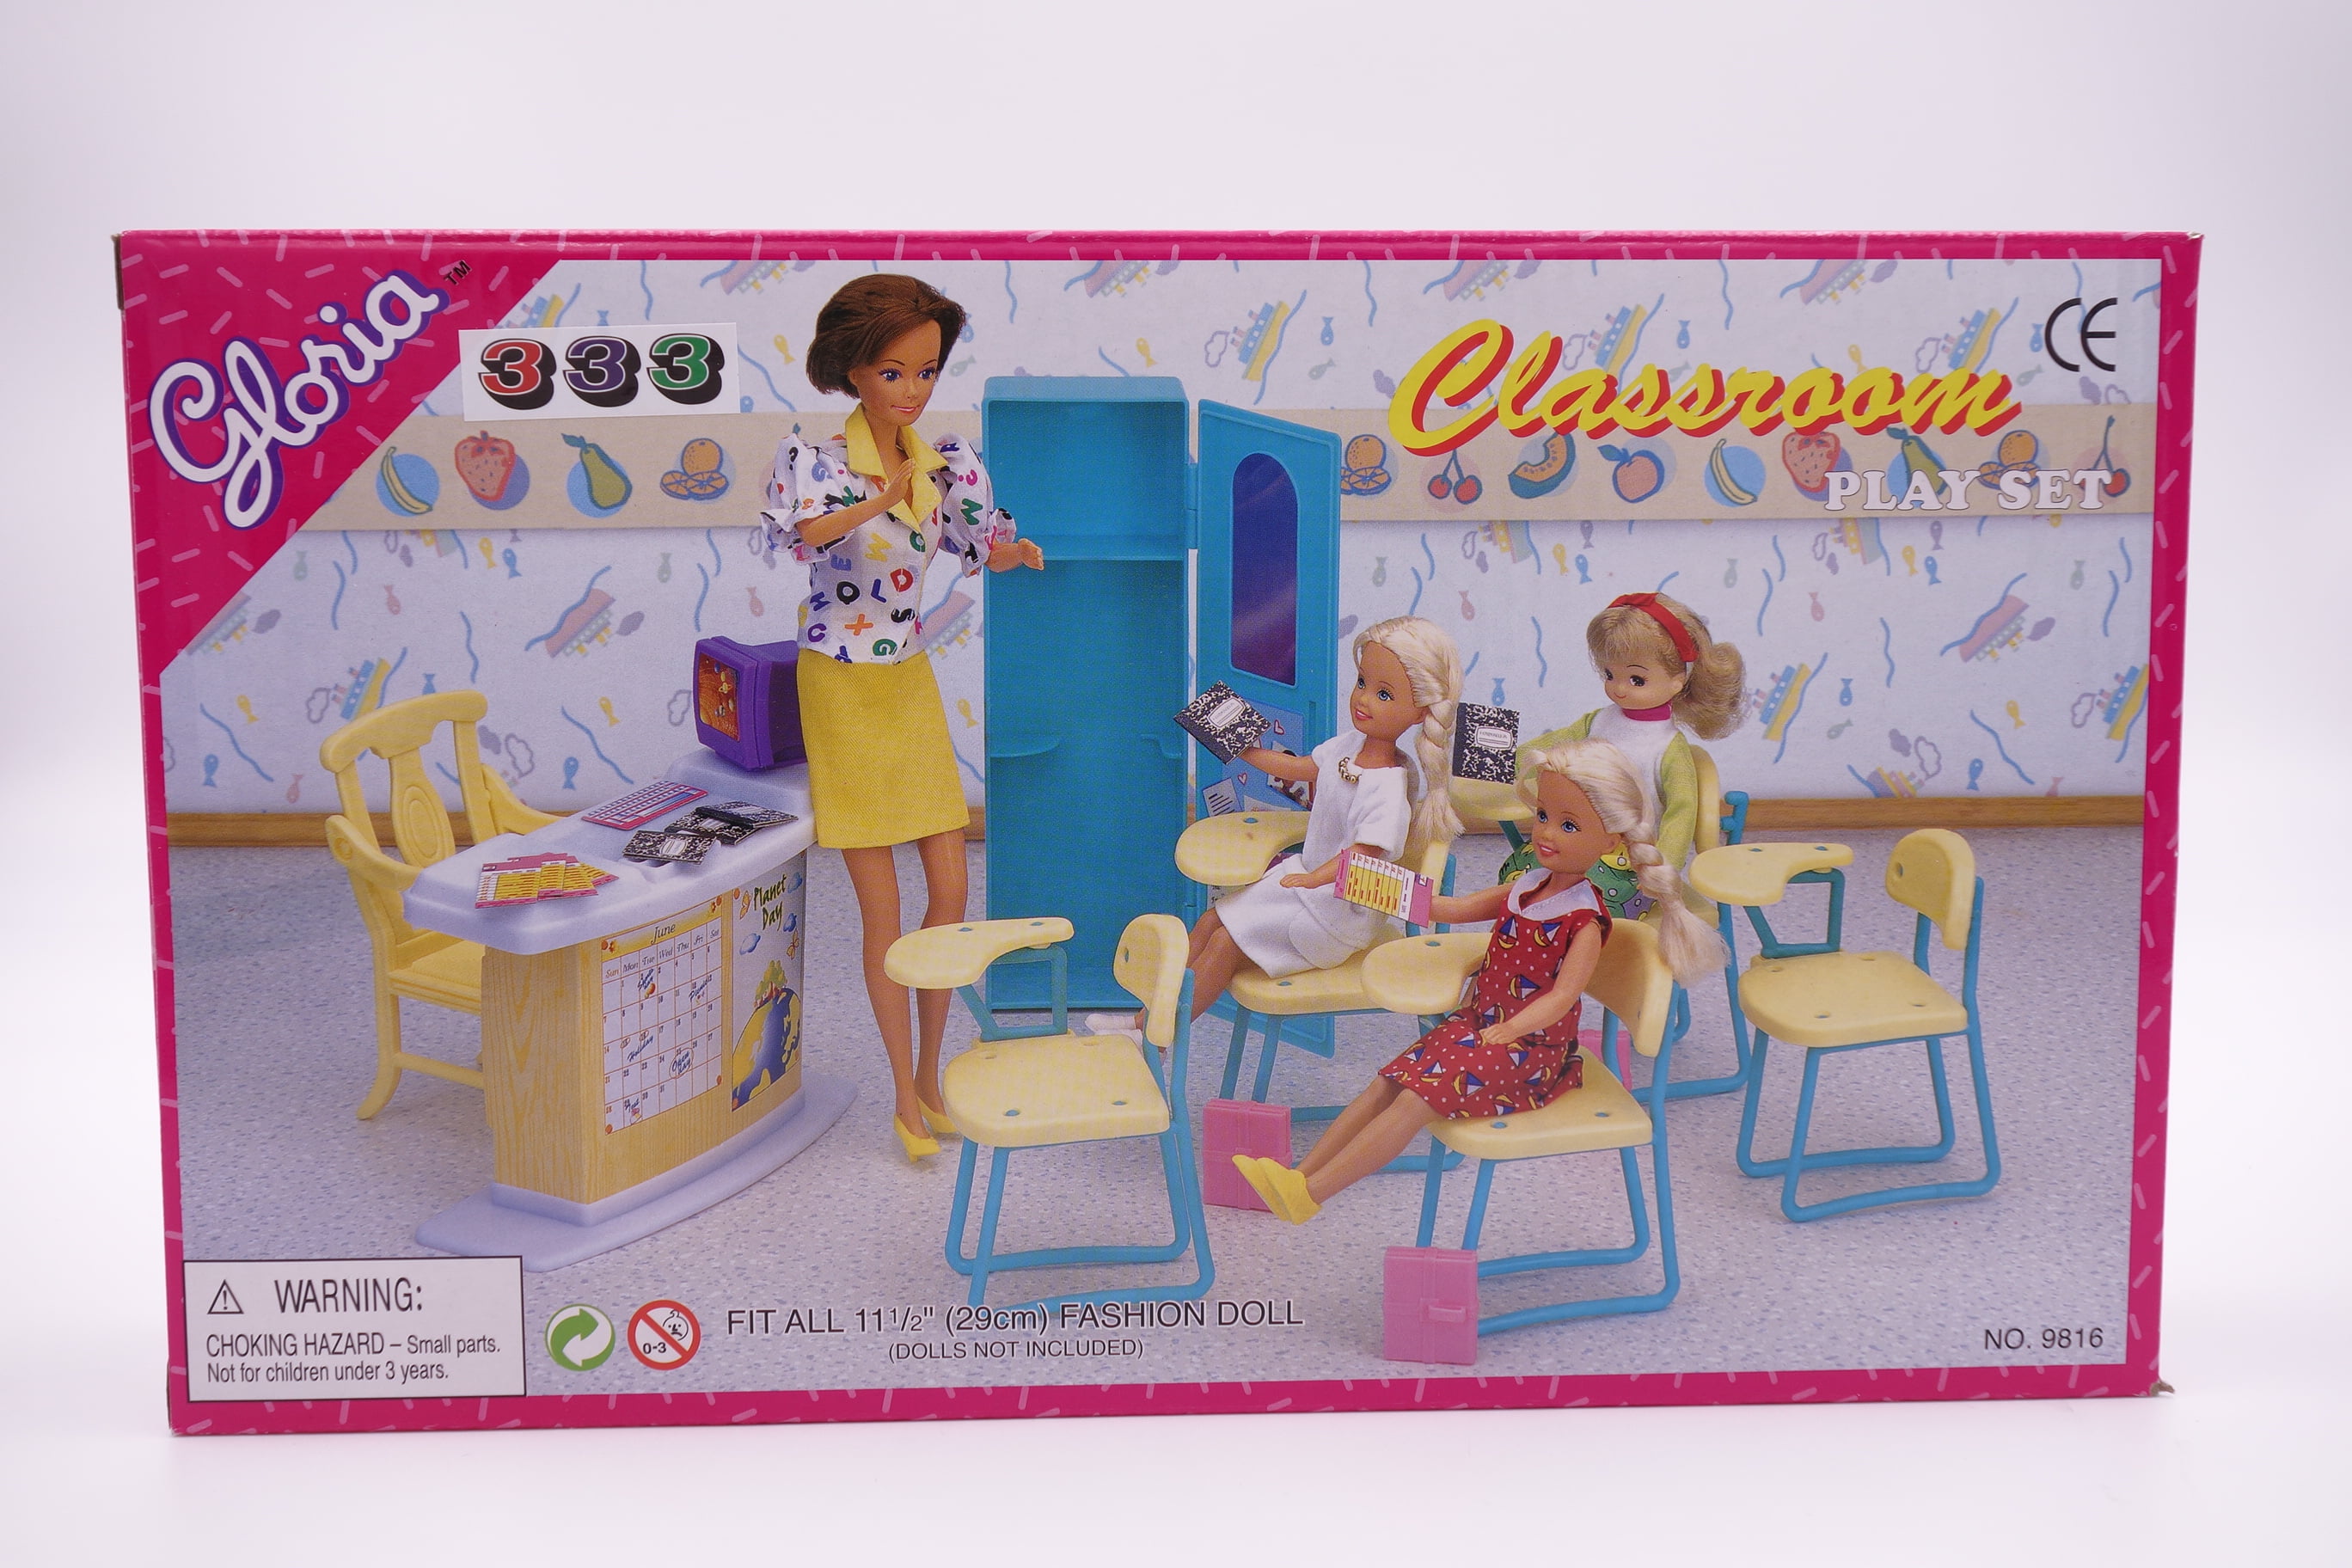 New Barbie Size Dollhouse Furniture Classroom Play Set Free Shipping 